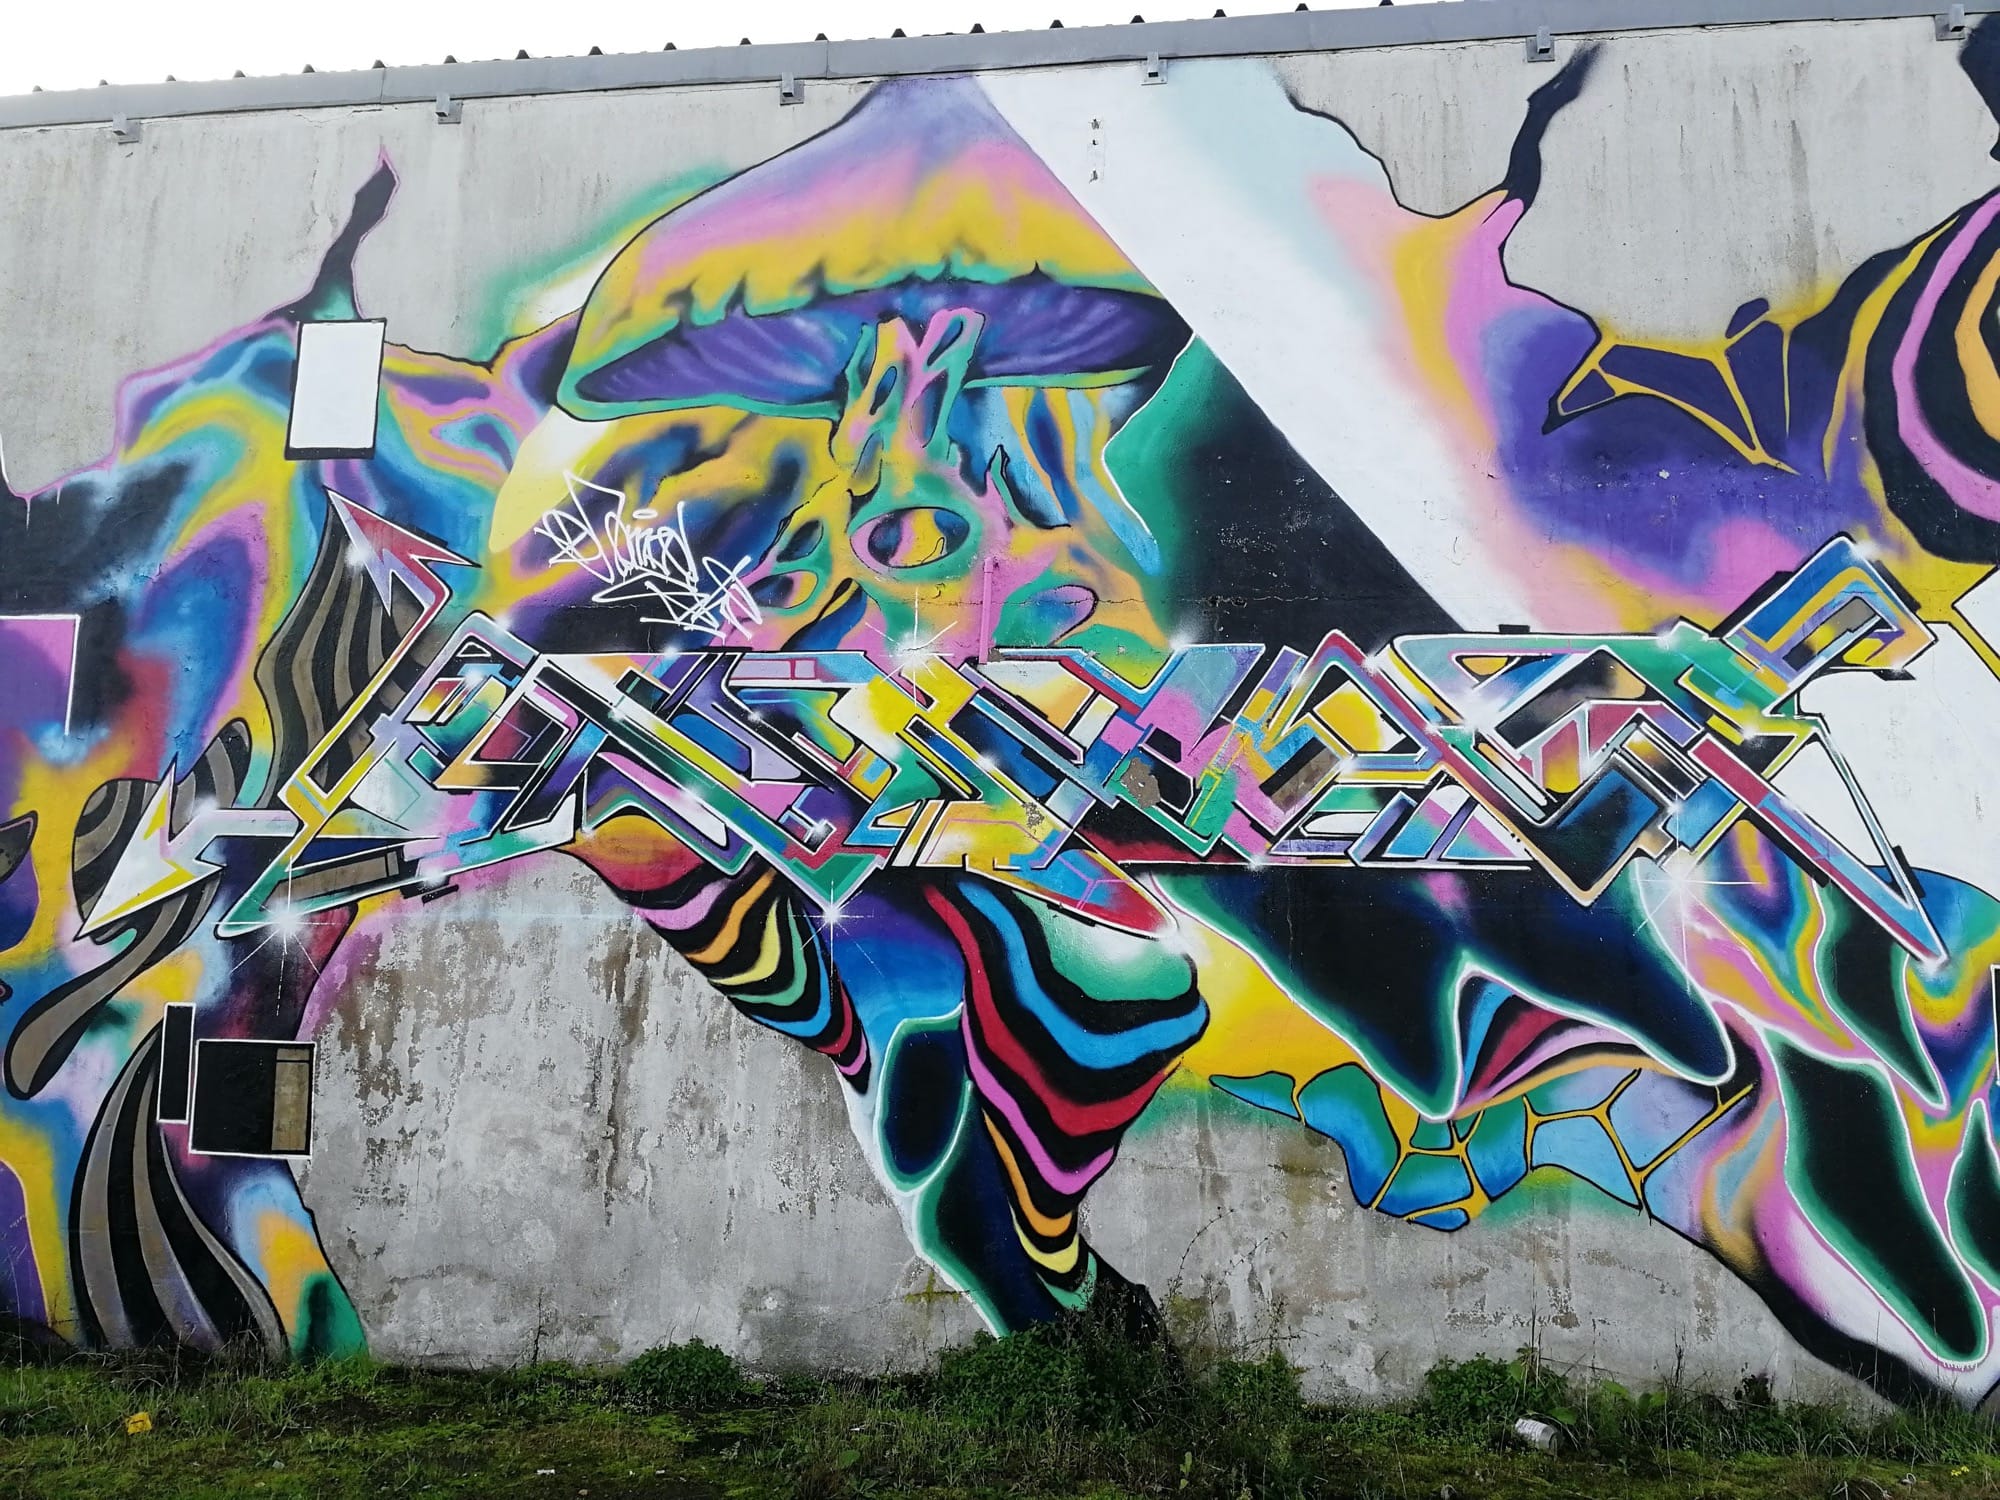 Graffiti 2998  captured by Rabot in Nantes France